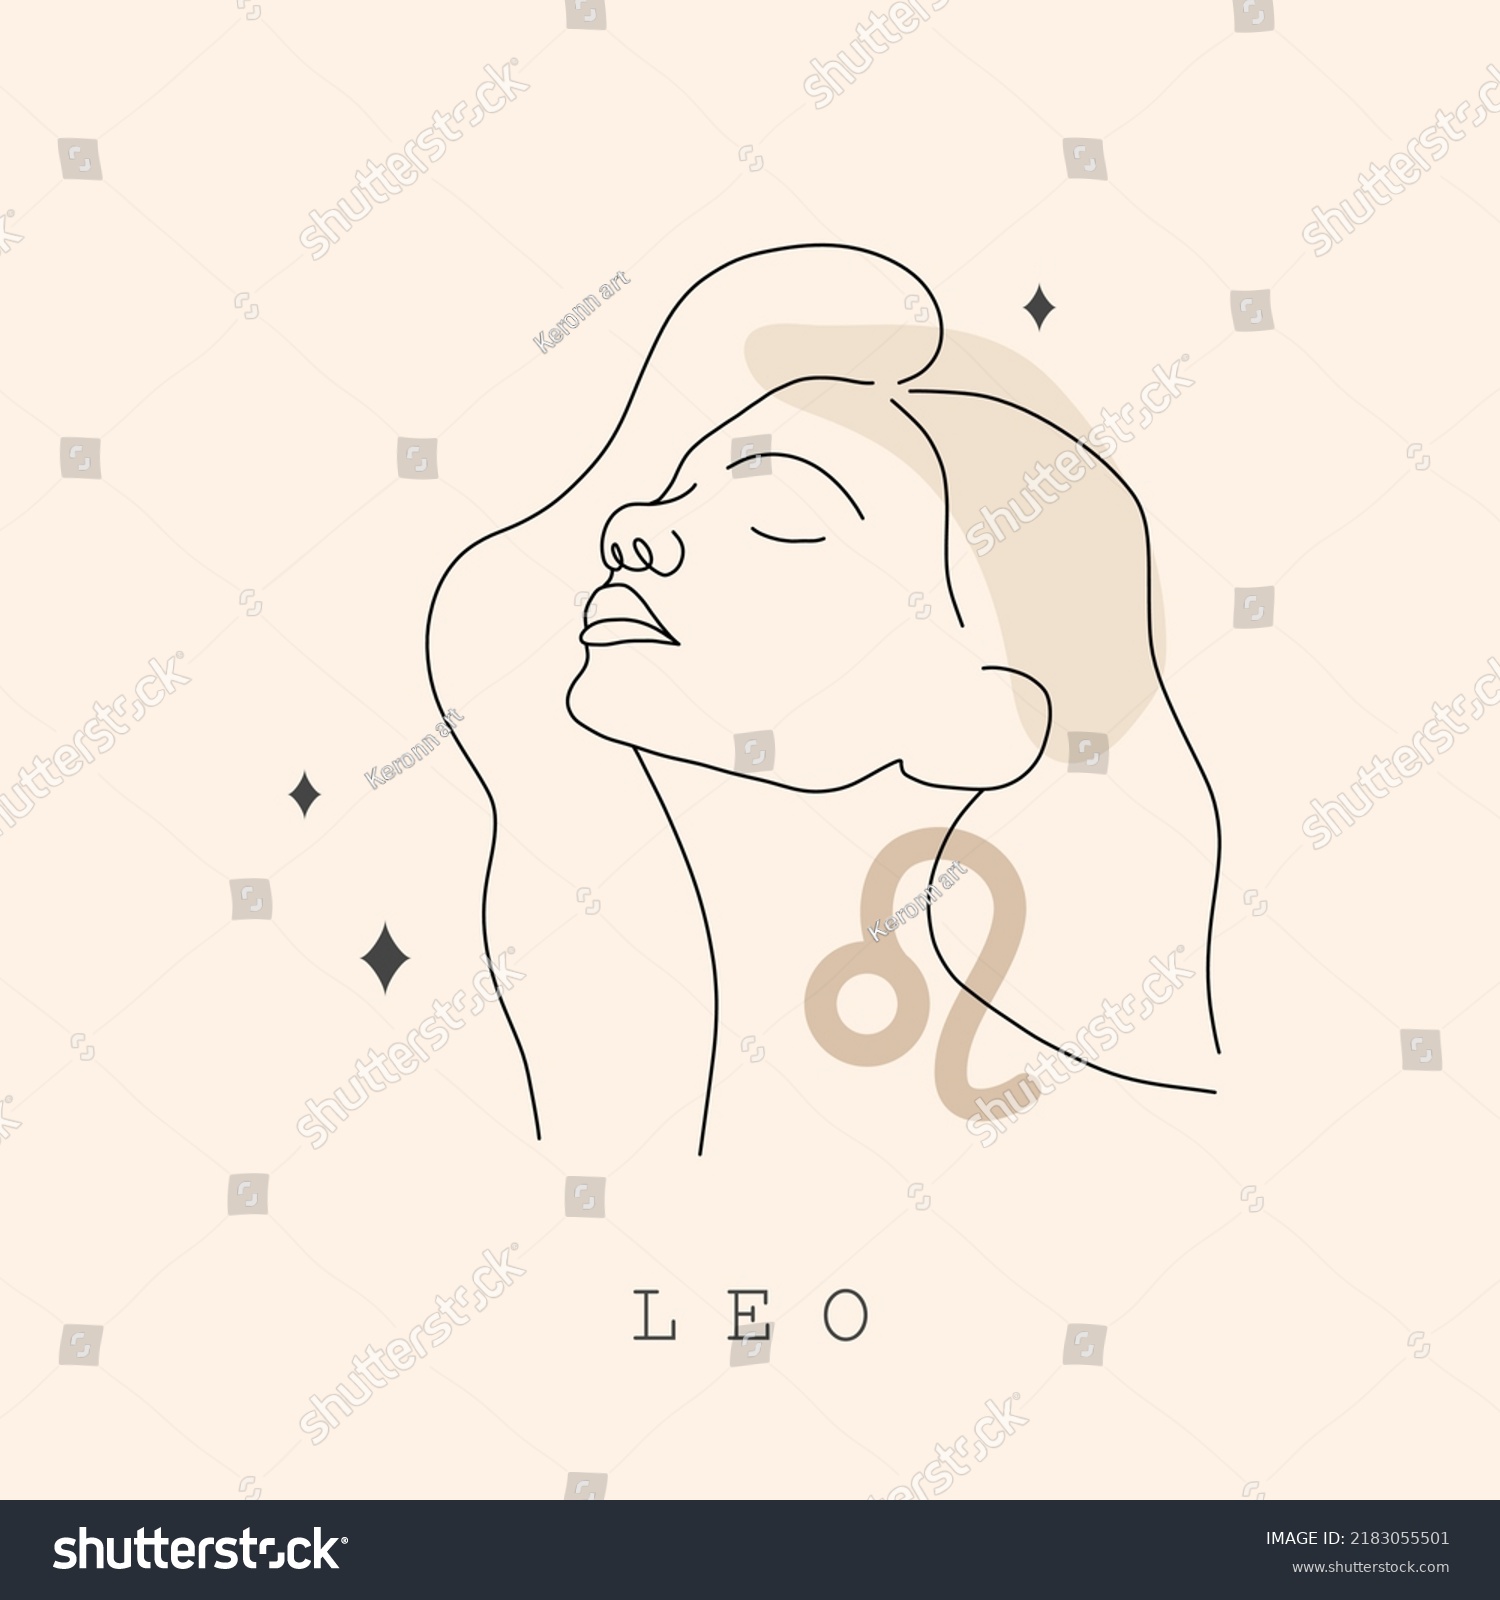 Leo Zodiac Sign One Line Drawing Stock Vector Royalty Free Shutterstock